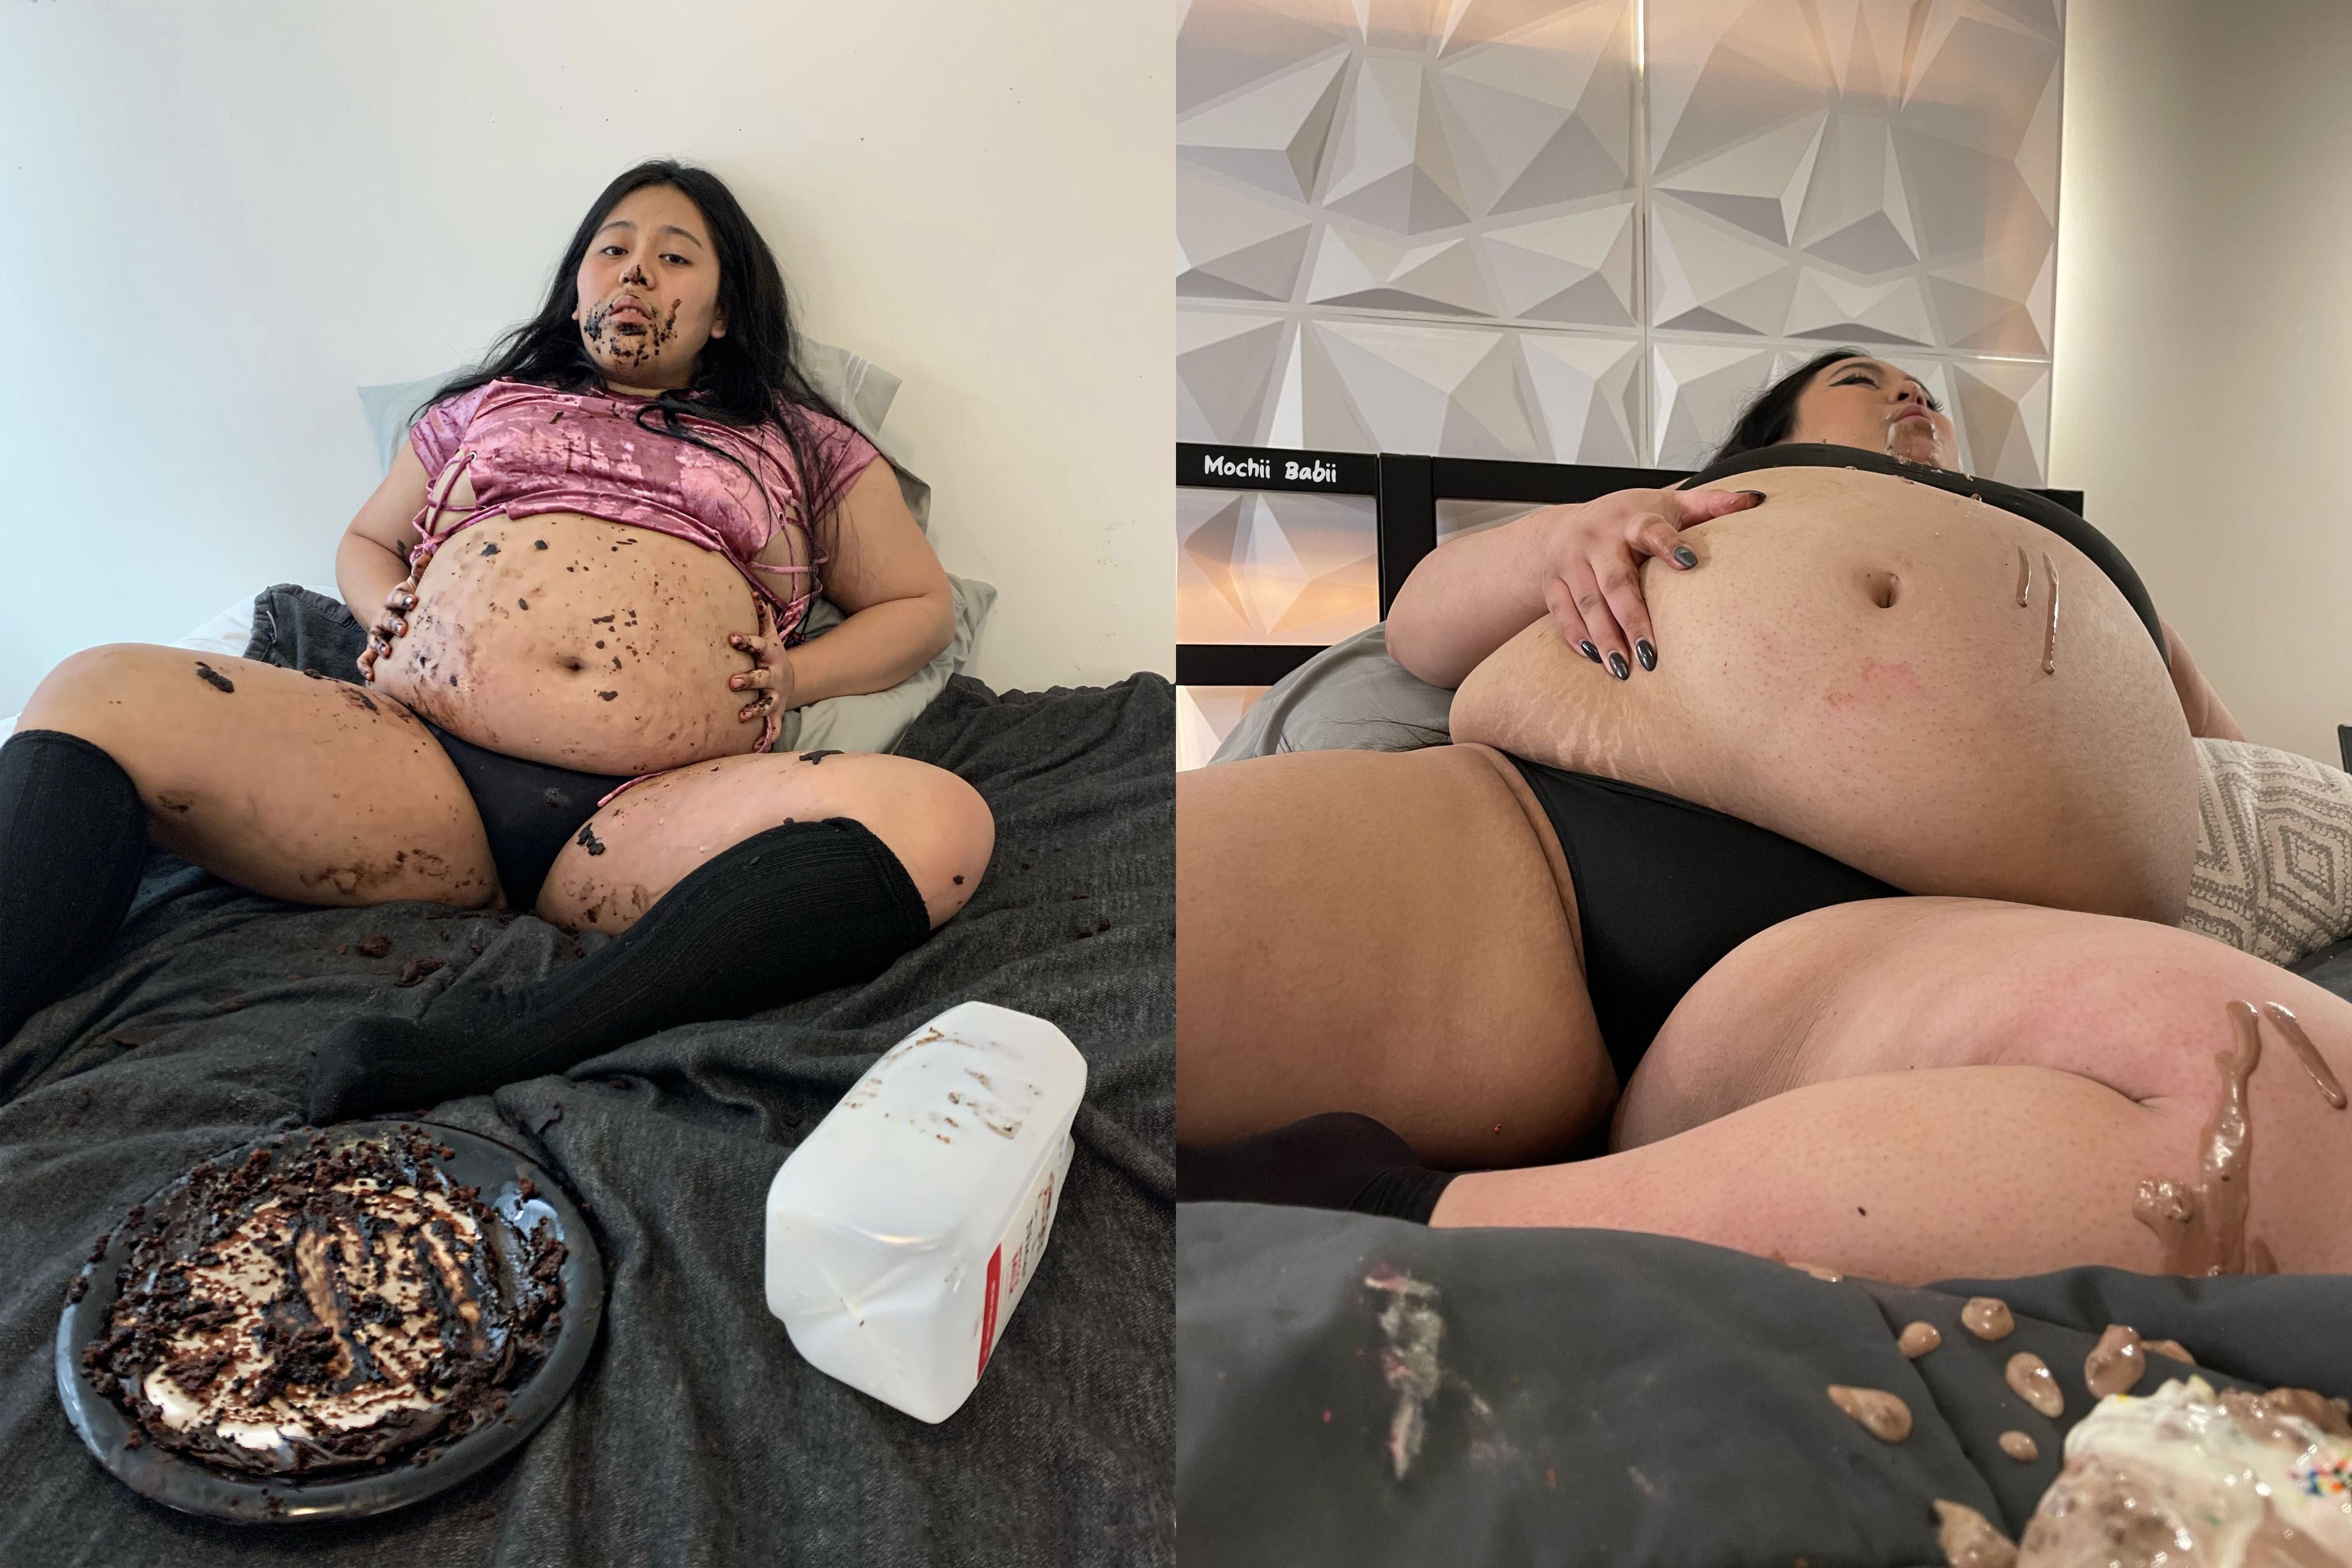 2 years of insatiable gluttony